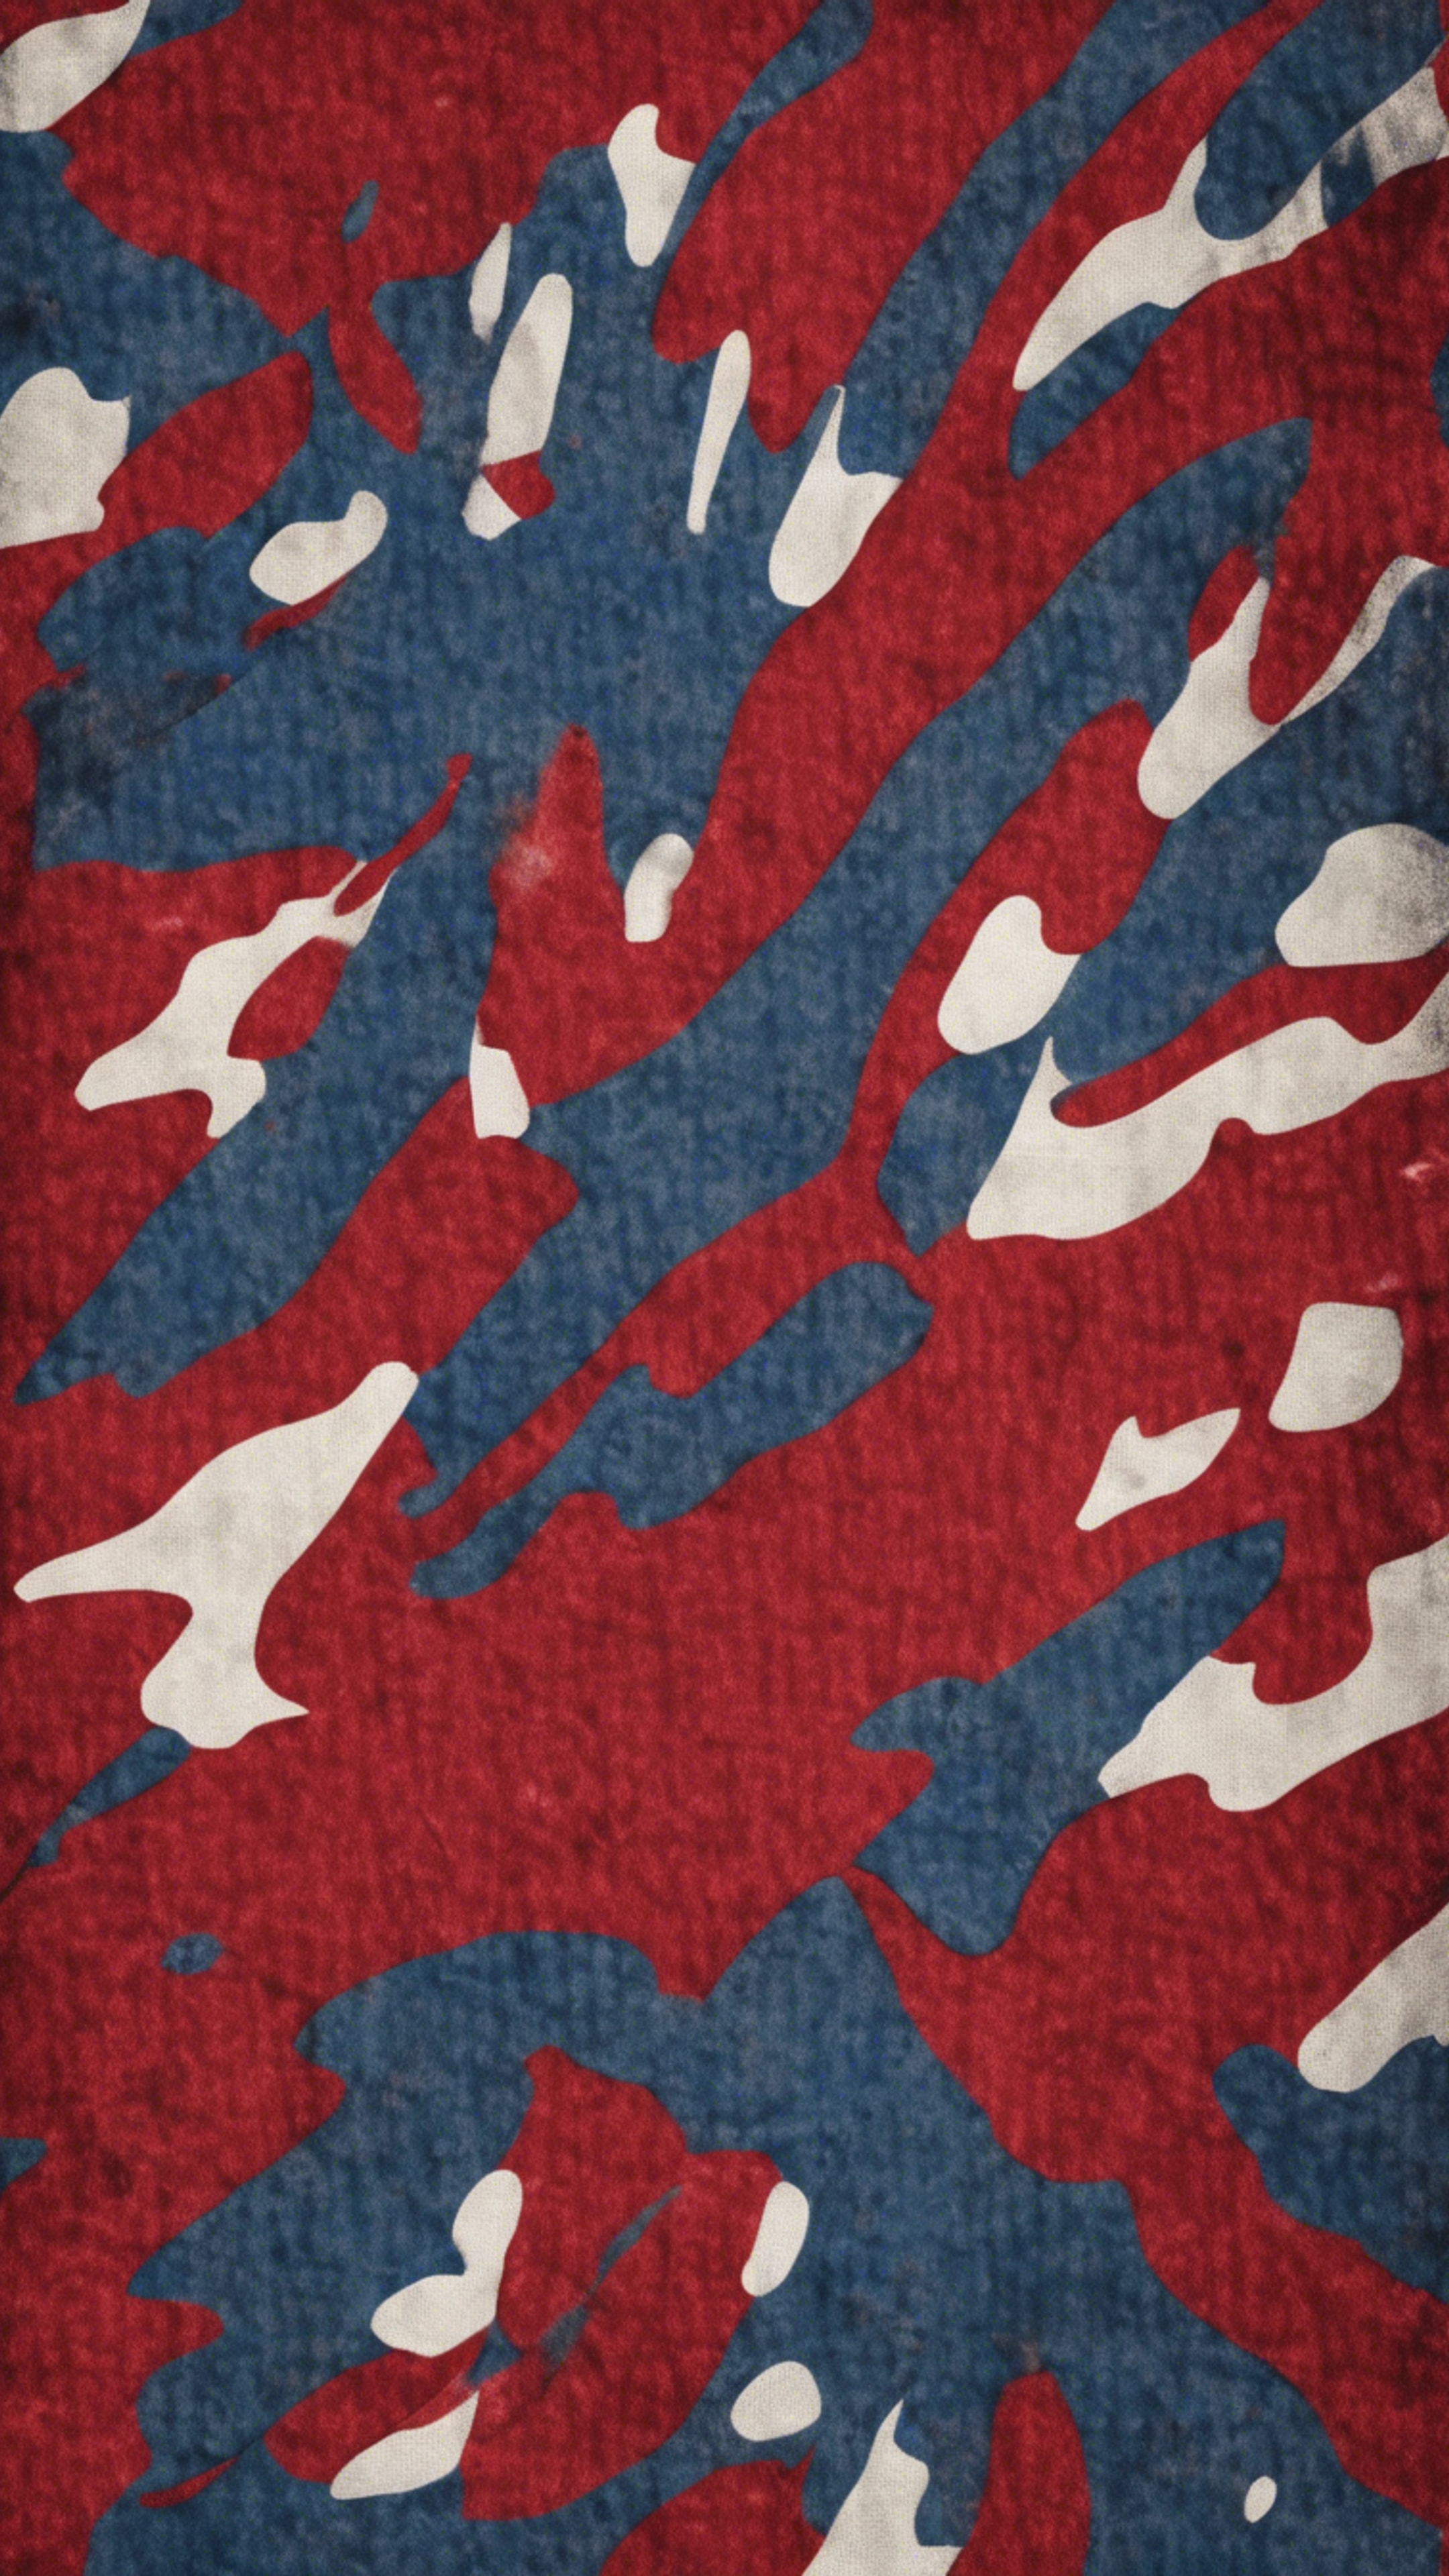 Red and blue camouflage pattern used in navy uniforms. Валлпапер[01ccfb252ca748fab57f]